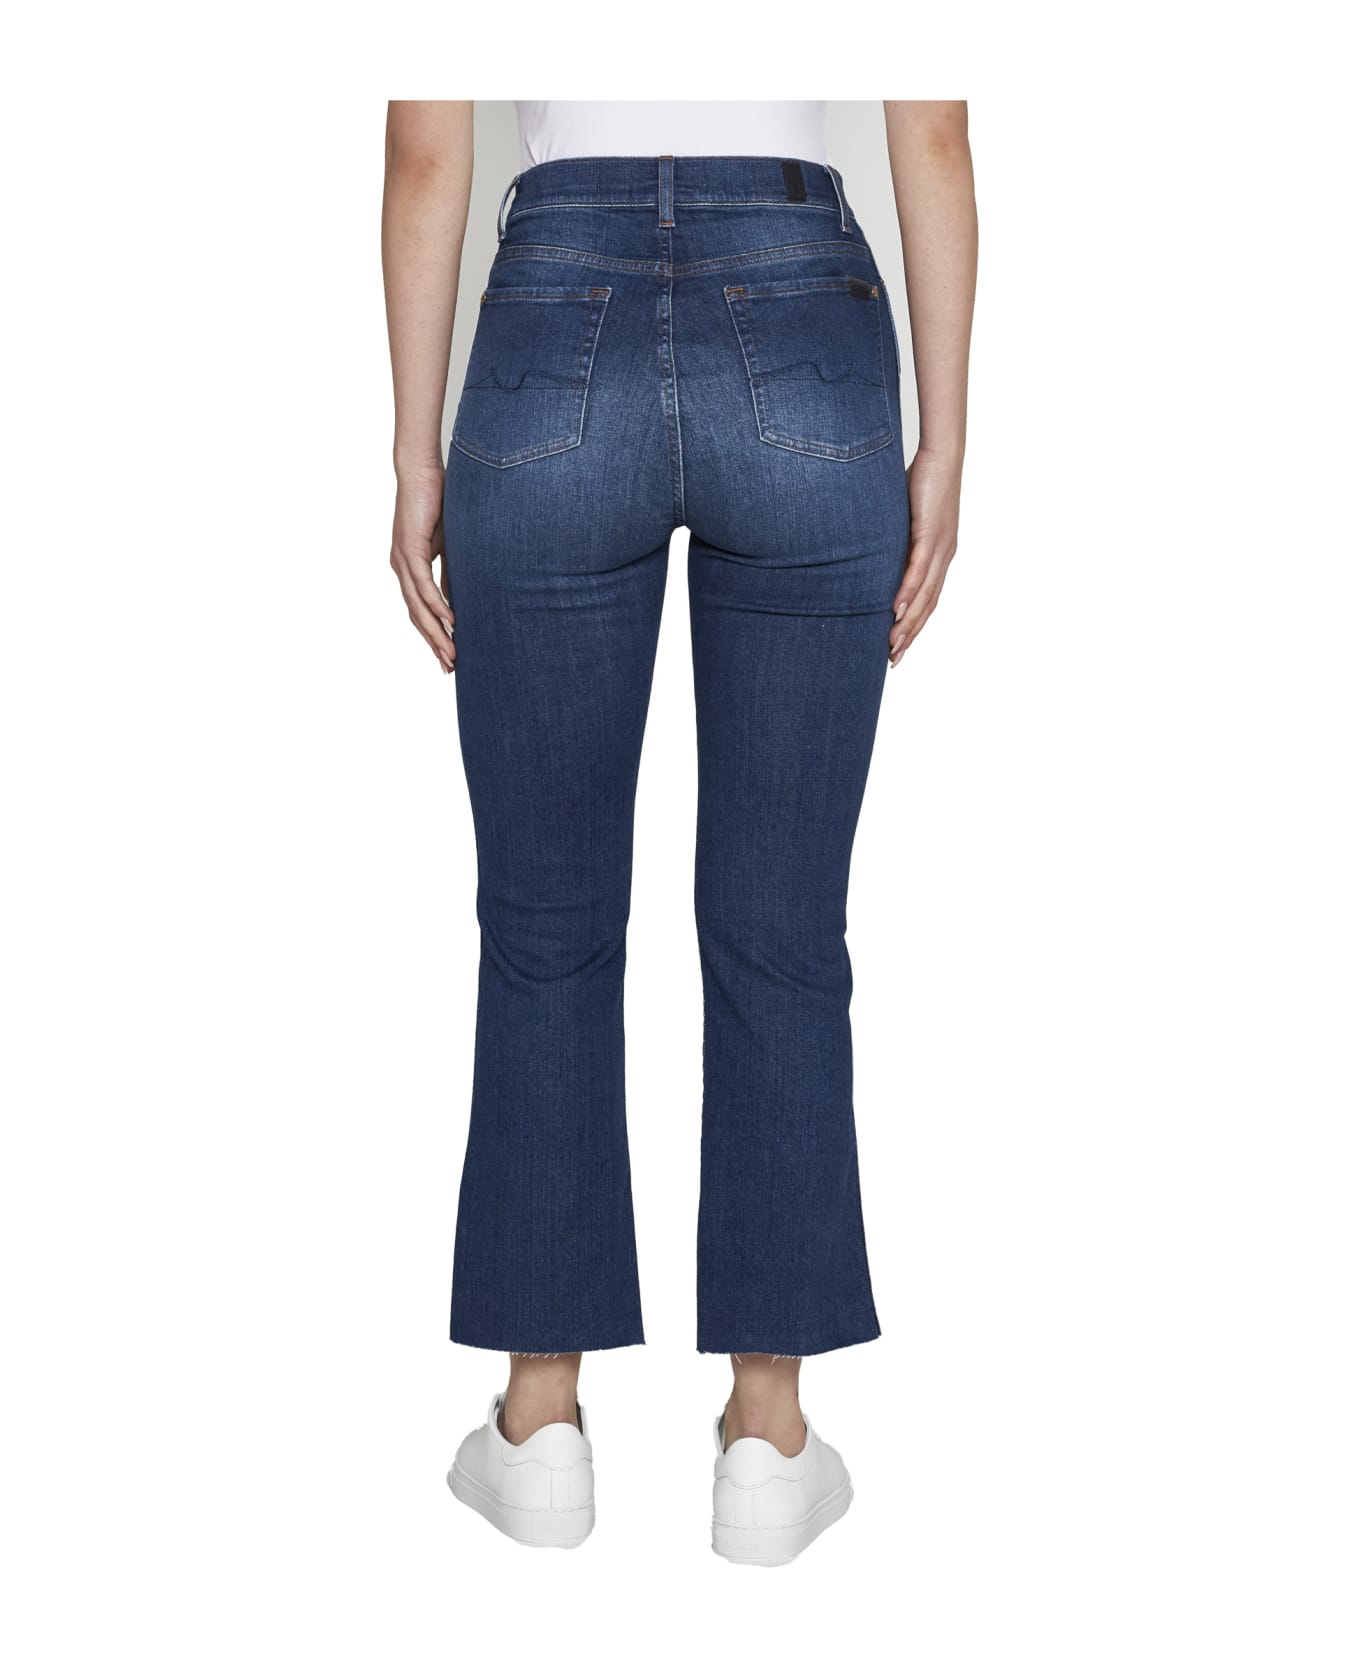 7 For All Mankind Jeans - DENIM BLUE